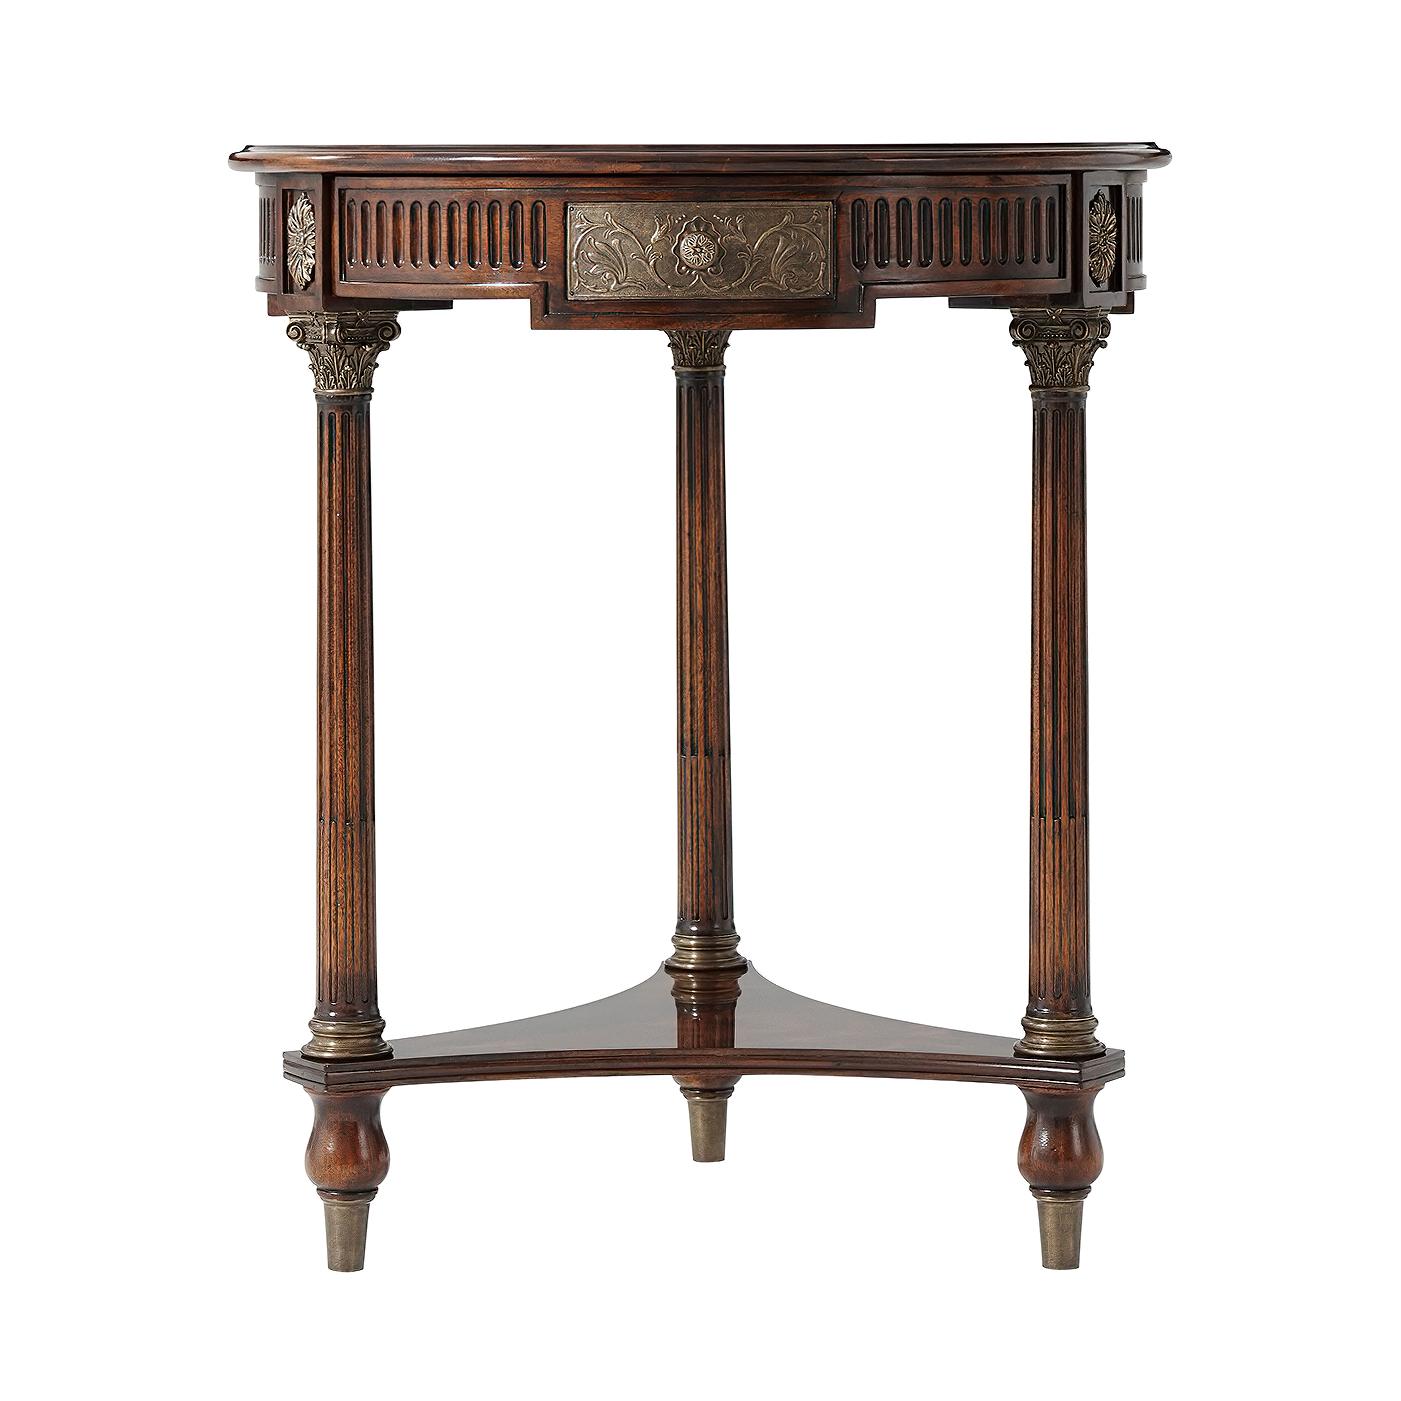 A French mahogany veneer and mahogany lamp table, the circular top above a fluted frieze and a hand worked 'bronzed' repousse panel drawer, on Corinthian capital and turned fluted legs joined by a concave sided trefoil undertier, on turned feet.